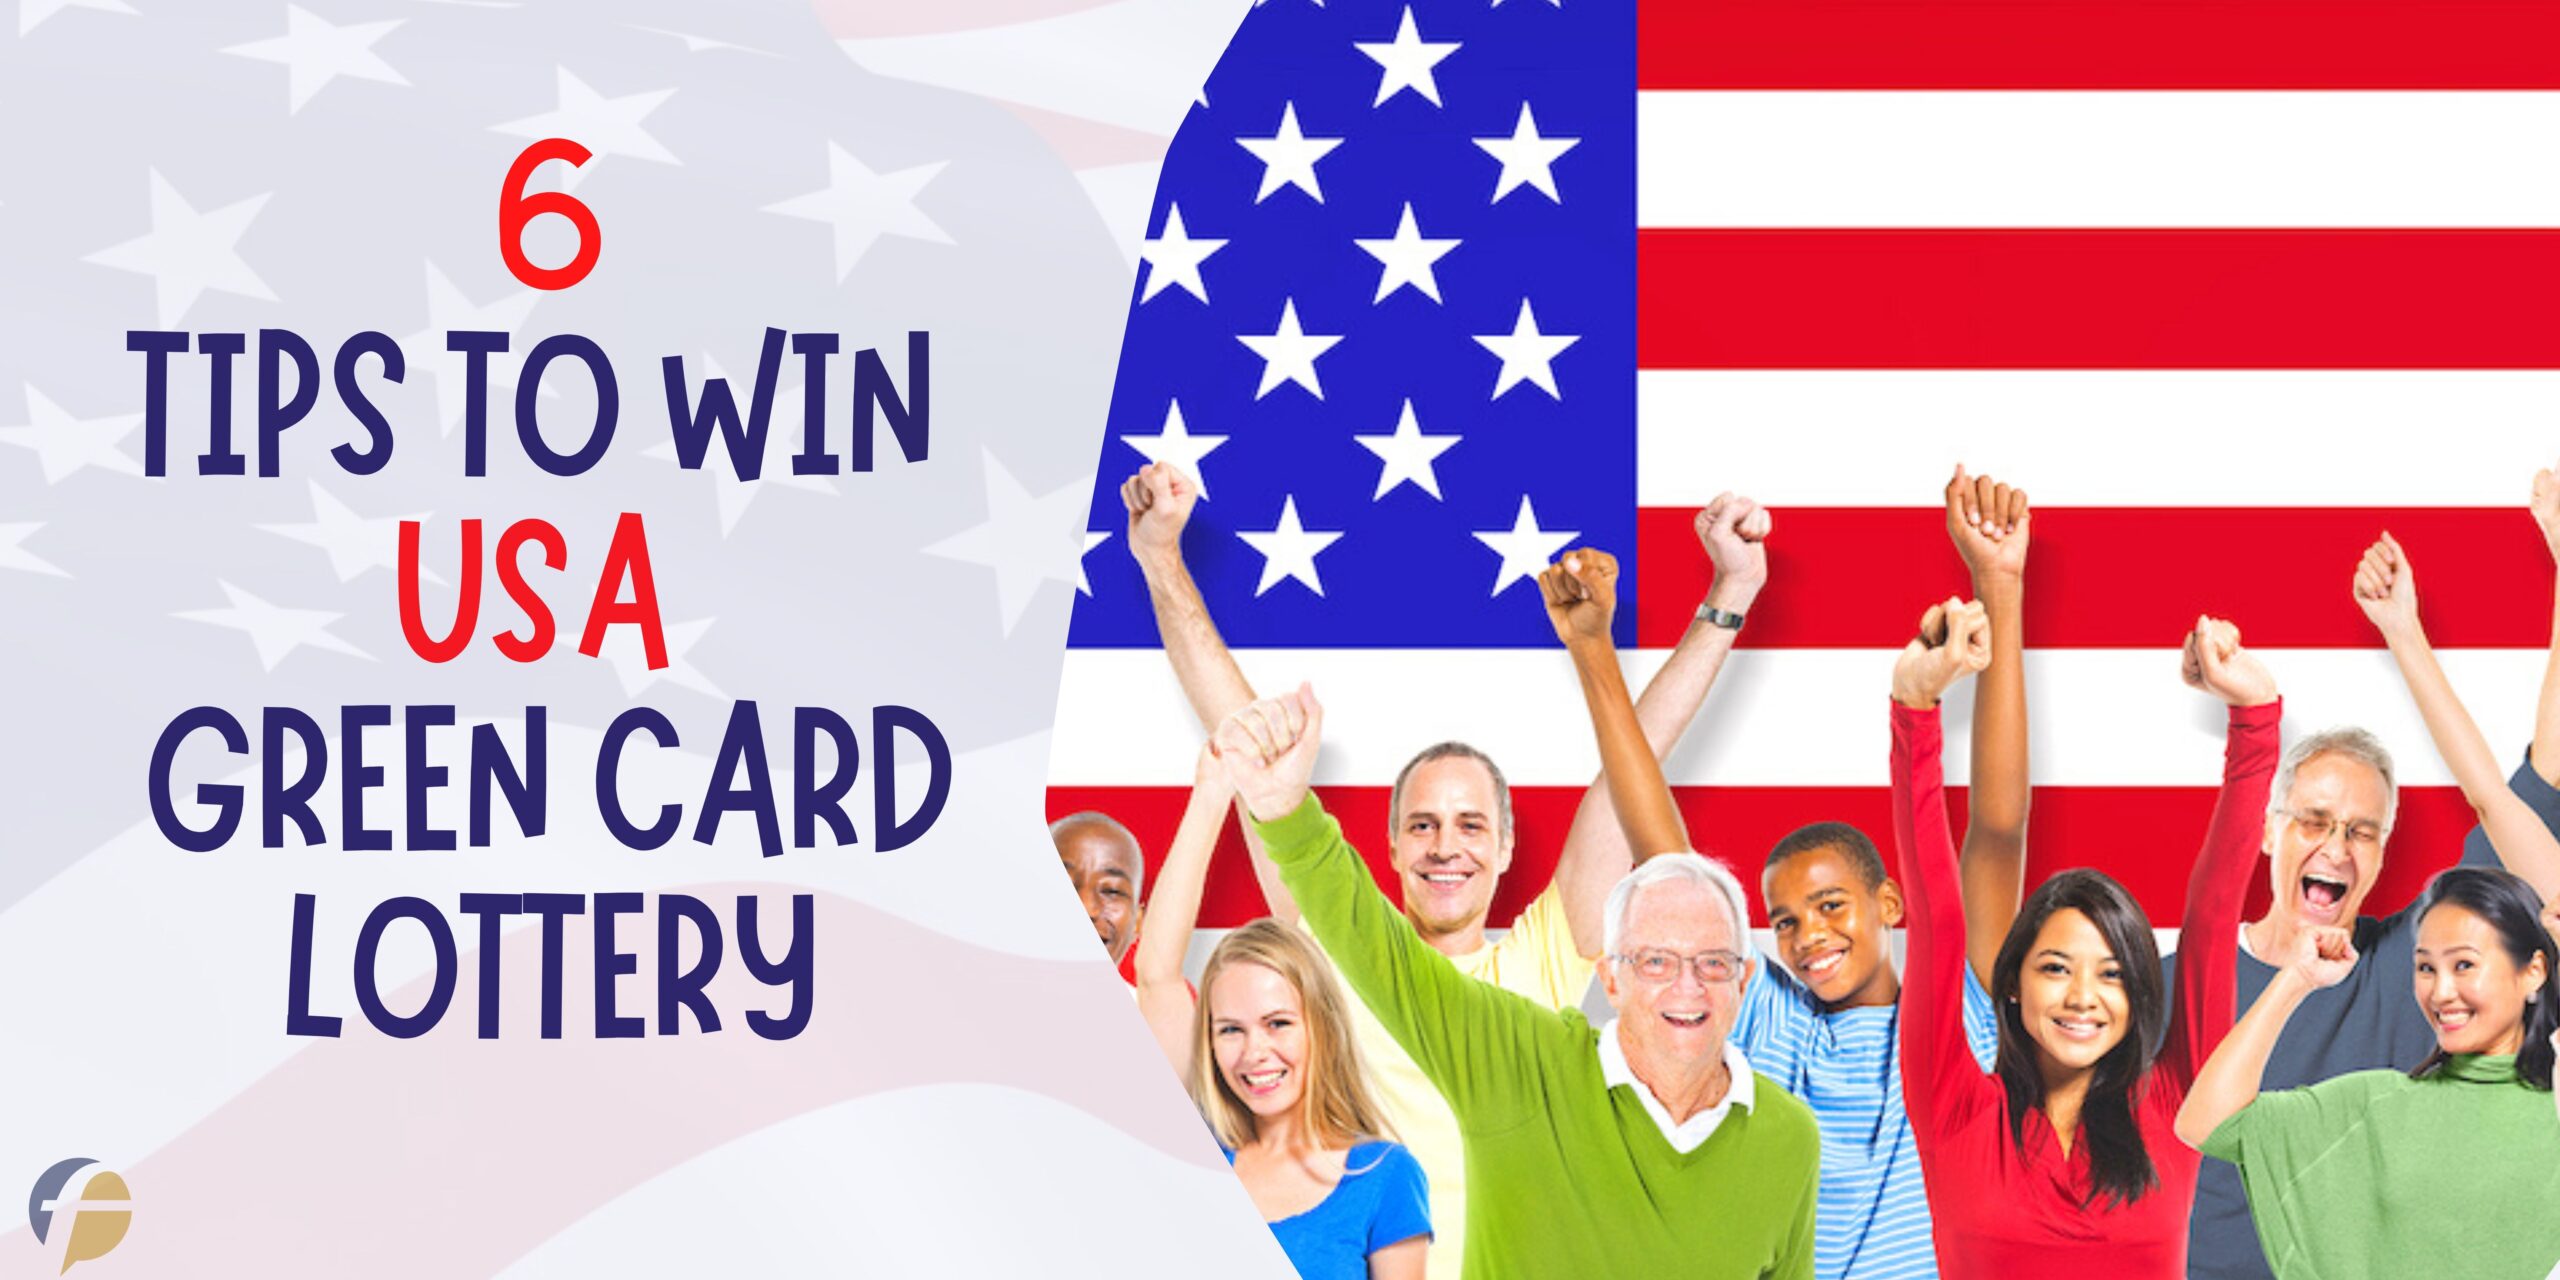 Green card lottery 5 tips to successfully win US Diversity Visa lottery